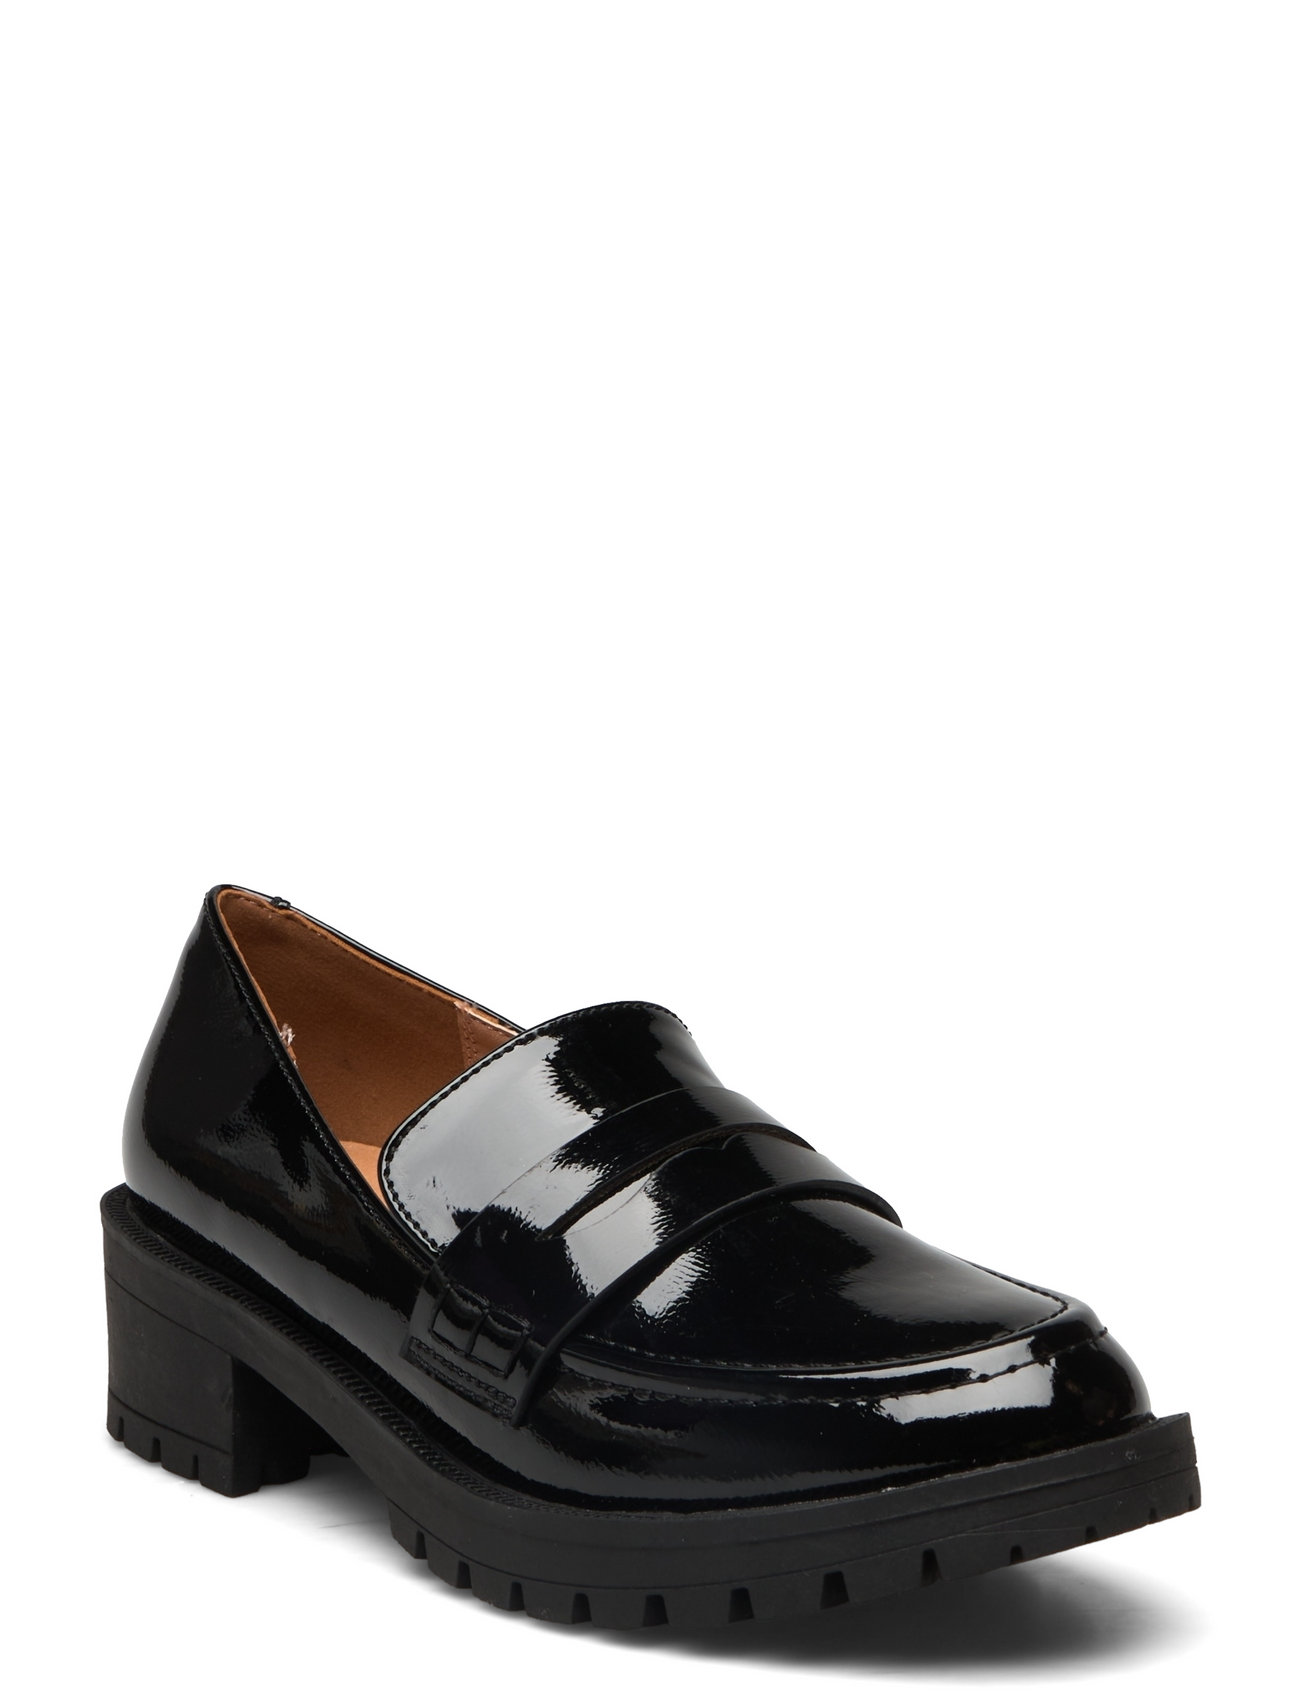 Biapearl Simple Penny Loafer Patent Aquarius Loafers Flade Sko Black Bianco